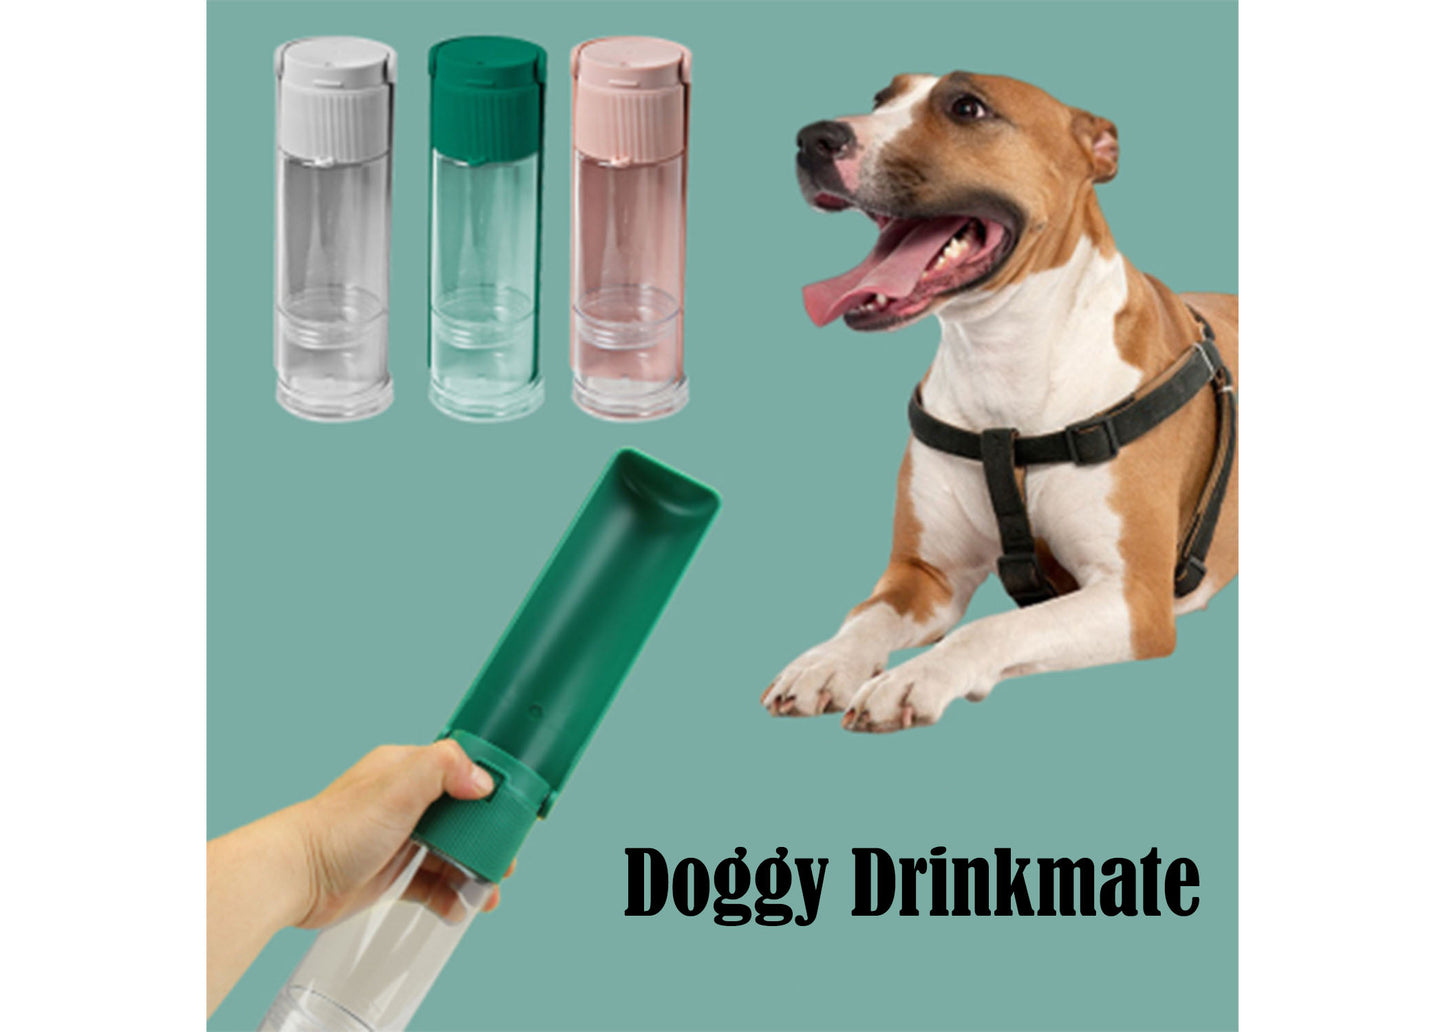 Doggy Drinkmate